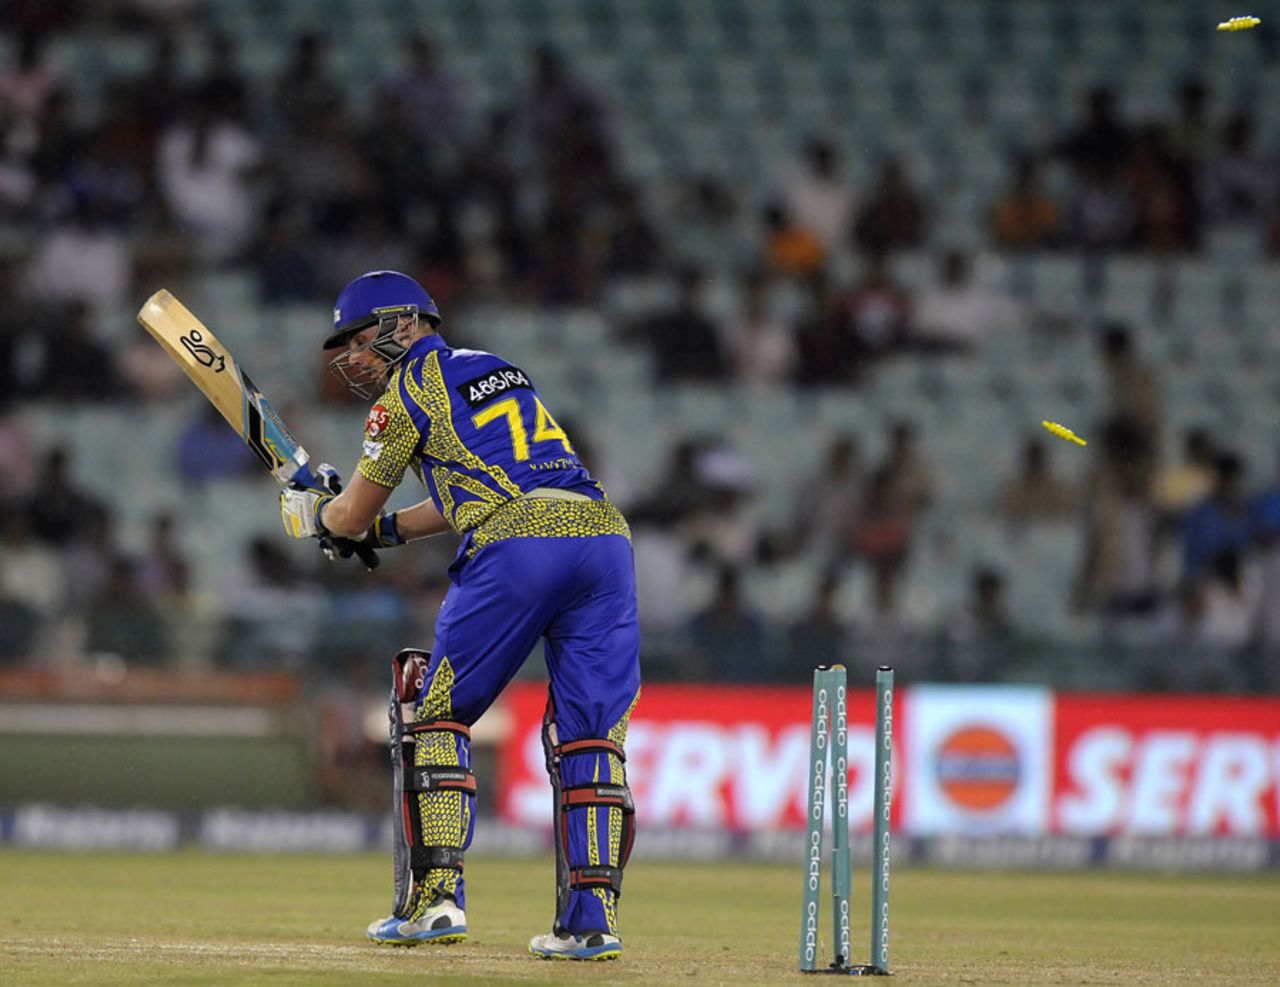 Stiaan van Zyl was cleaned up first ball, Cape Cobras v Northern Knights, Champions League T20, Raipur, September 19, 2014